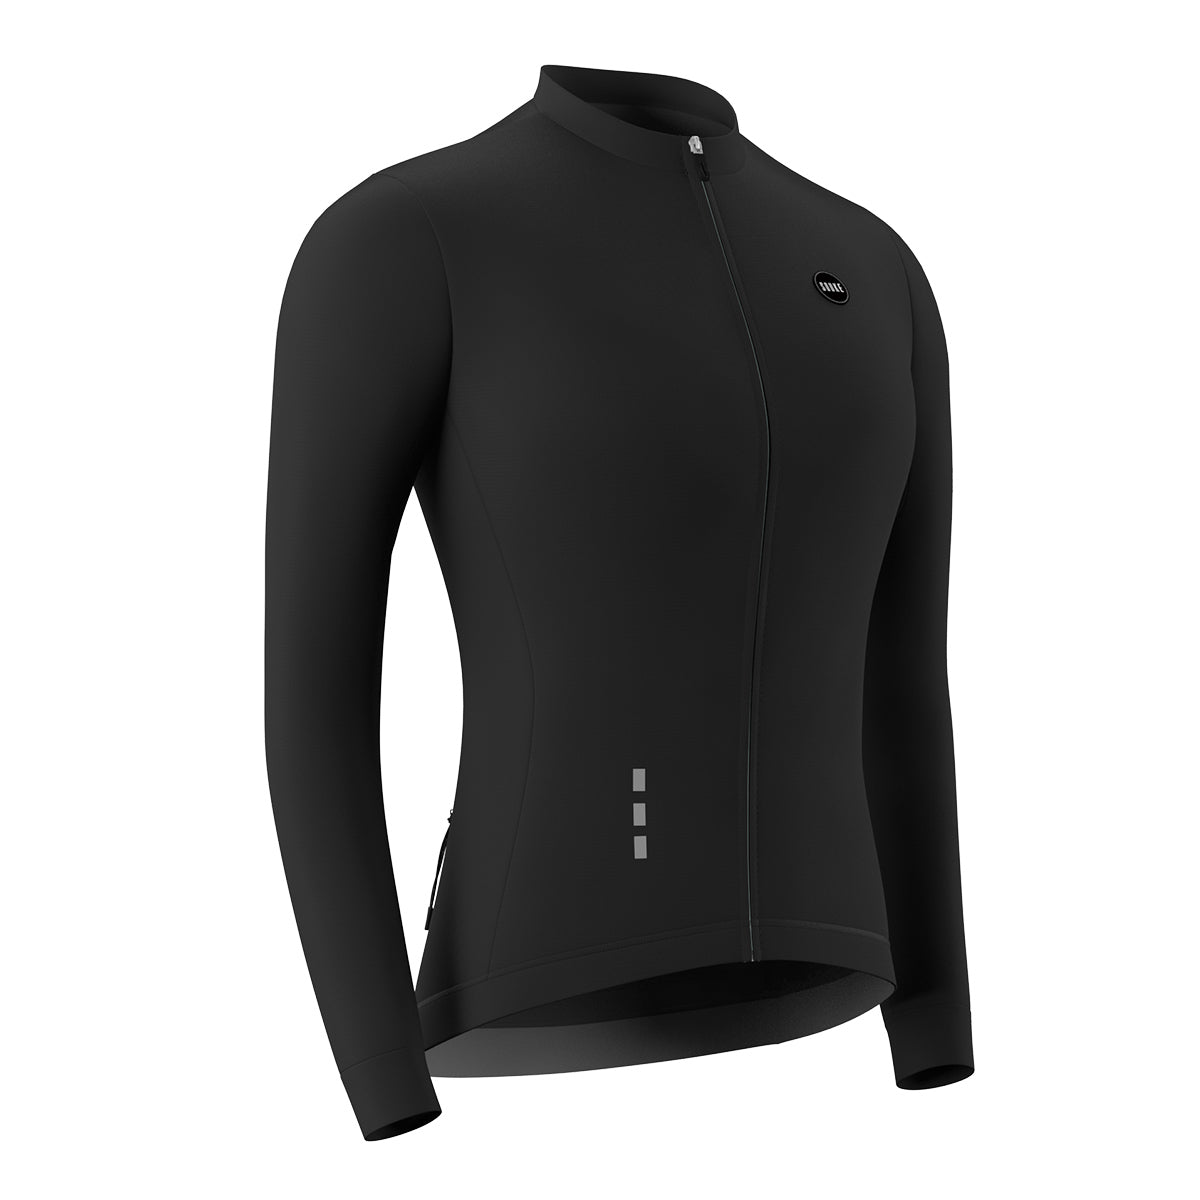 cycling long sleeve jersey, Black jersey,jersey for winter,Black long jersey for women,jersey for winter and autumn, cold weather jersey (6805618917489)